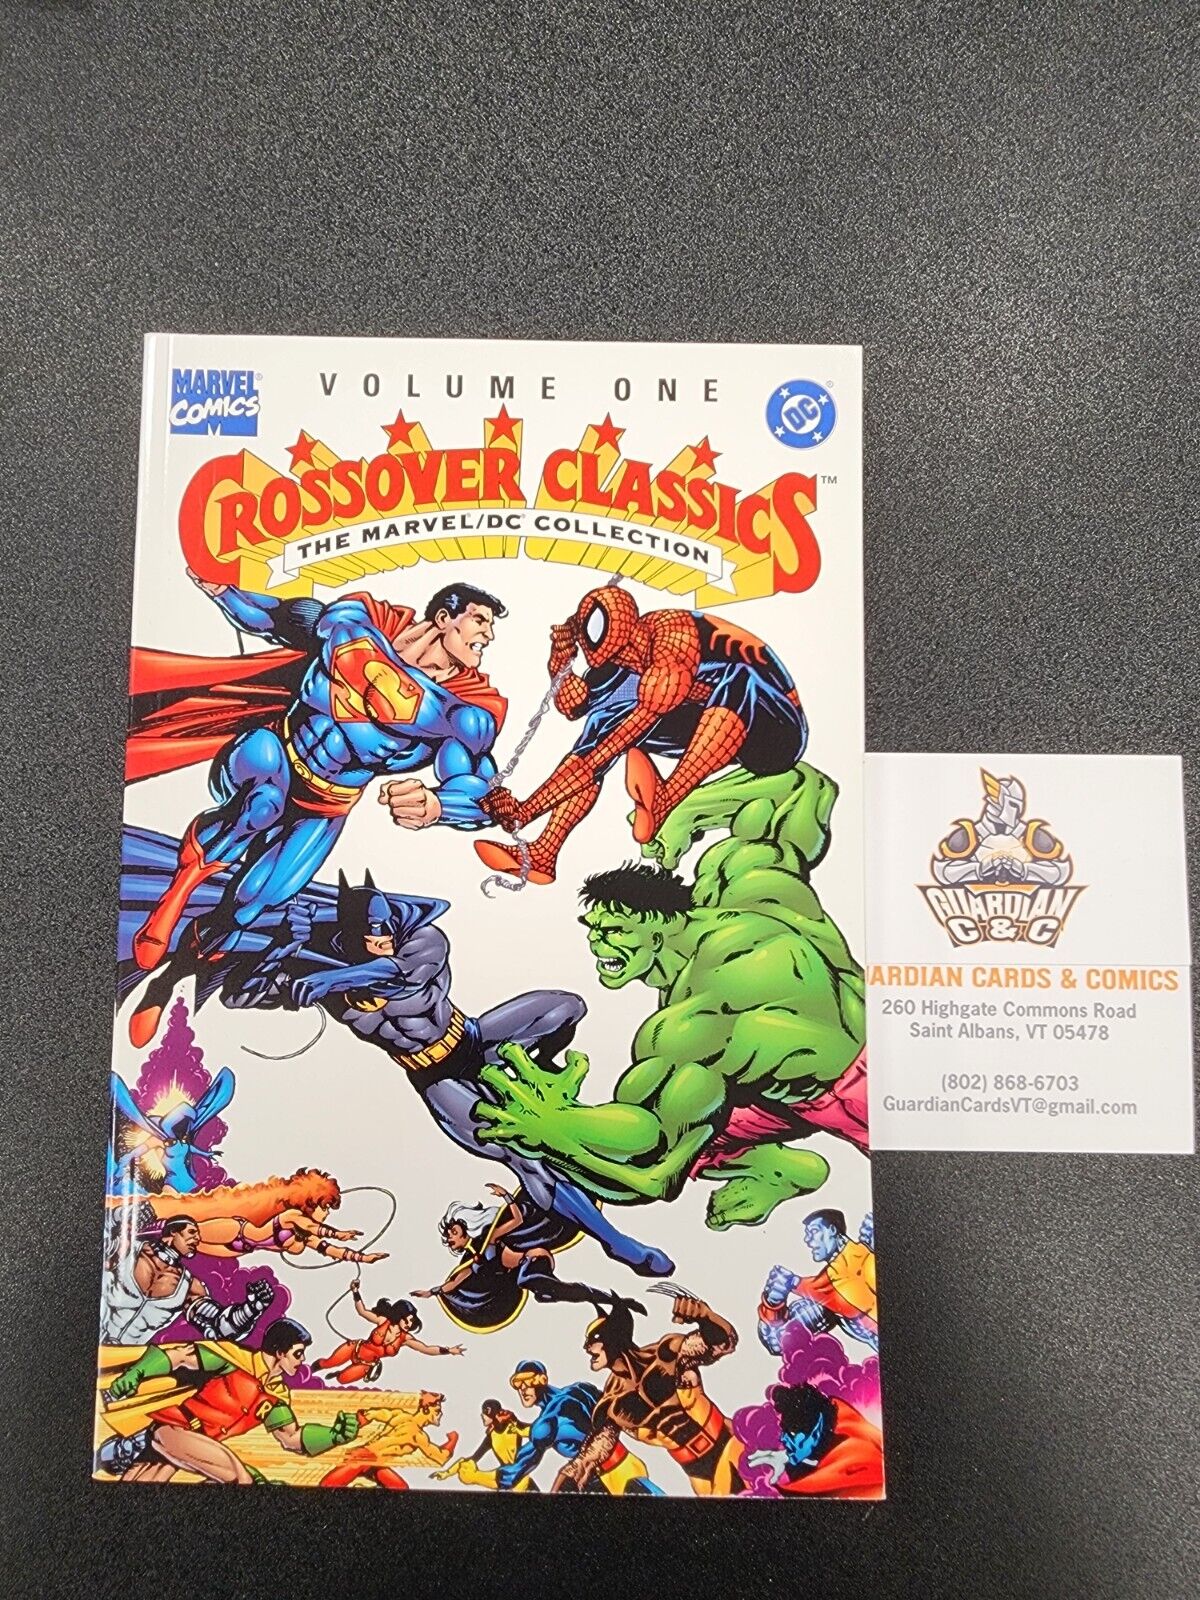 Crossover Classics: The Marvel/DC Collection Volume #1 (1996) TPB